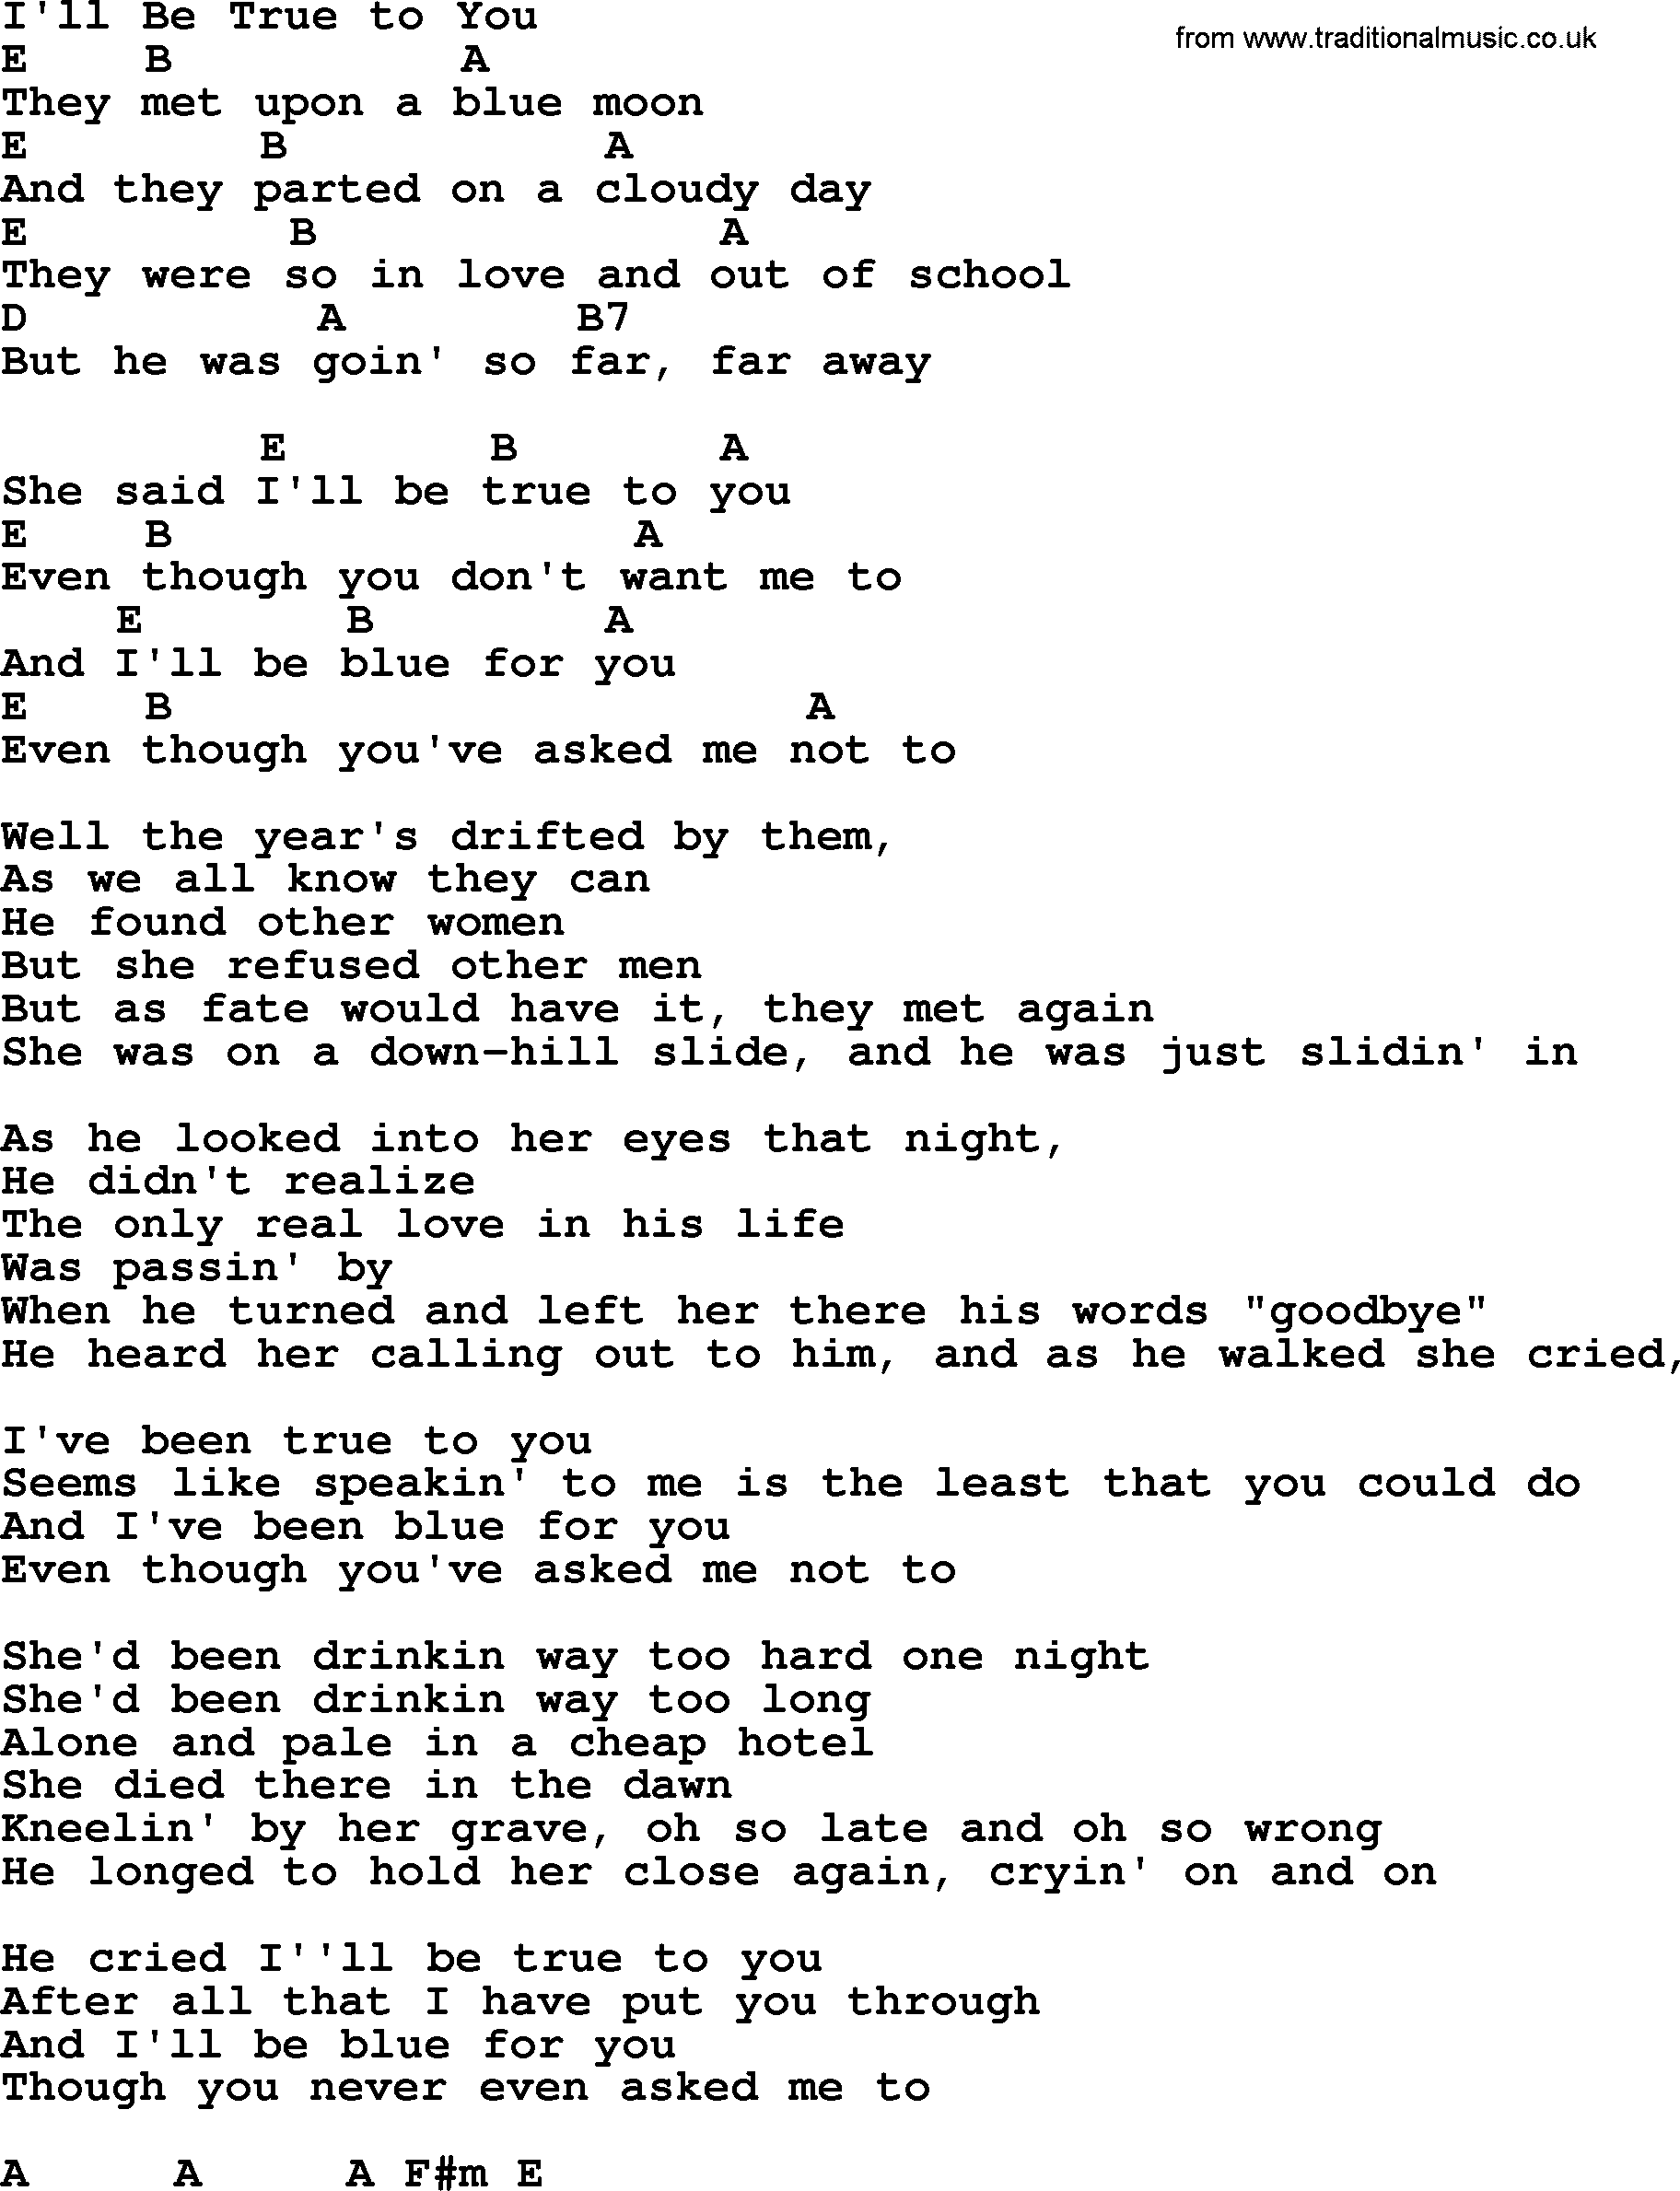 Bluegrass song: I'll Be True To You, lyrics and chords